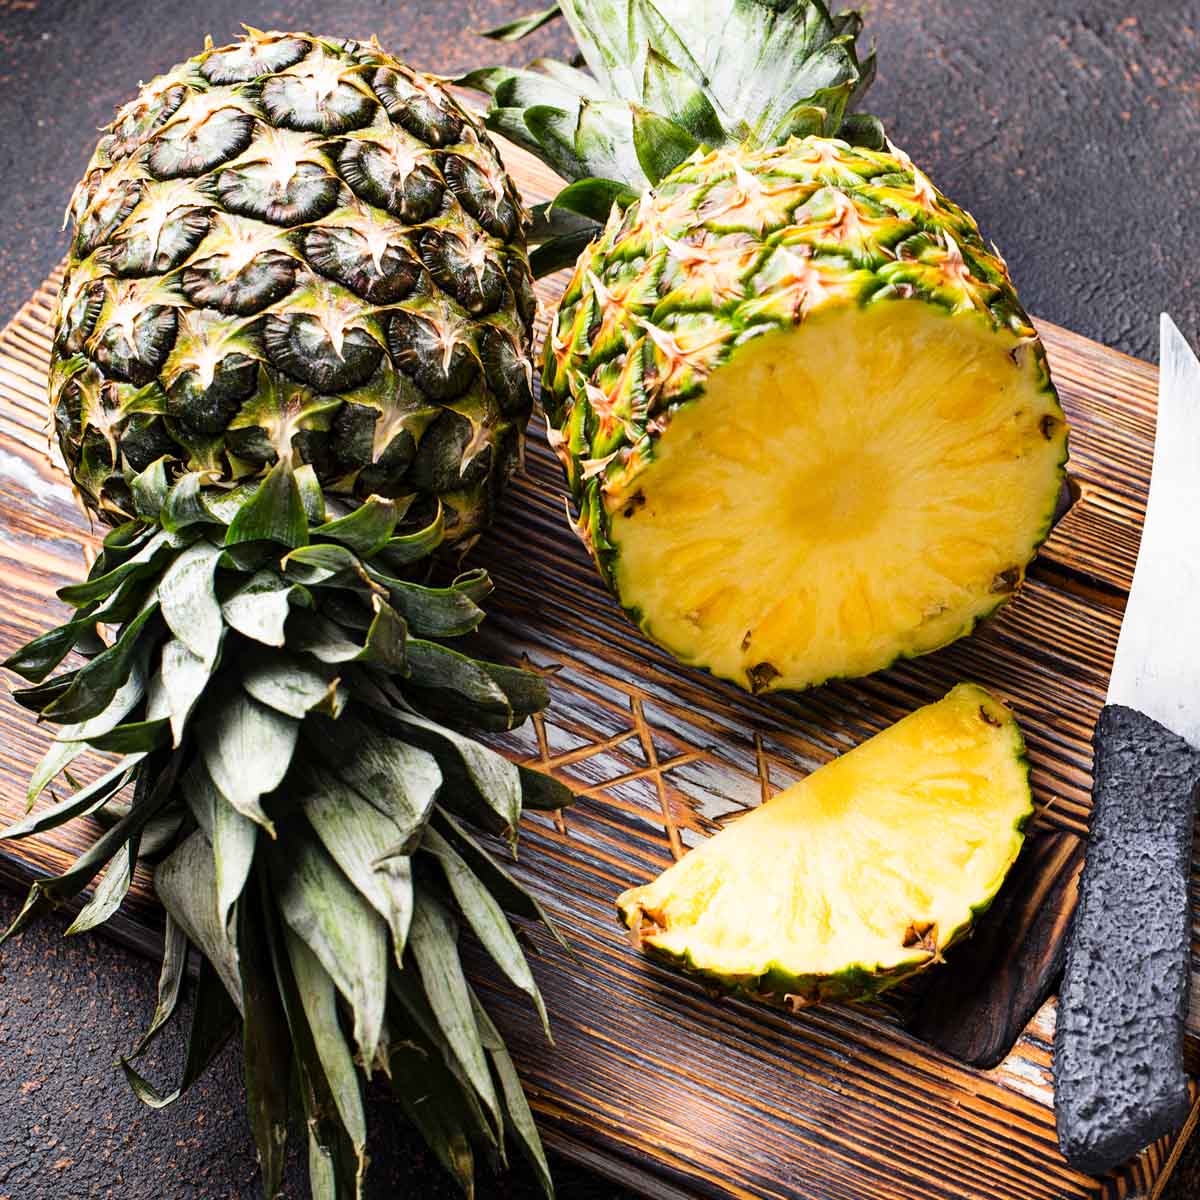 Once you pick a pineapple of the tree, the natural ripening process stops. There are few tricks on how to ripen the pineapple quickly that you can try. Read on to learn more.